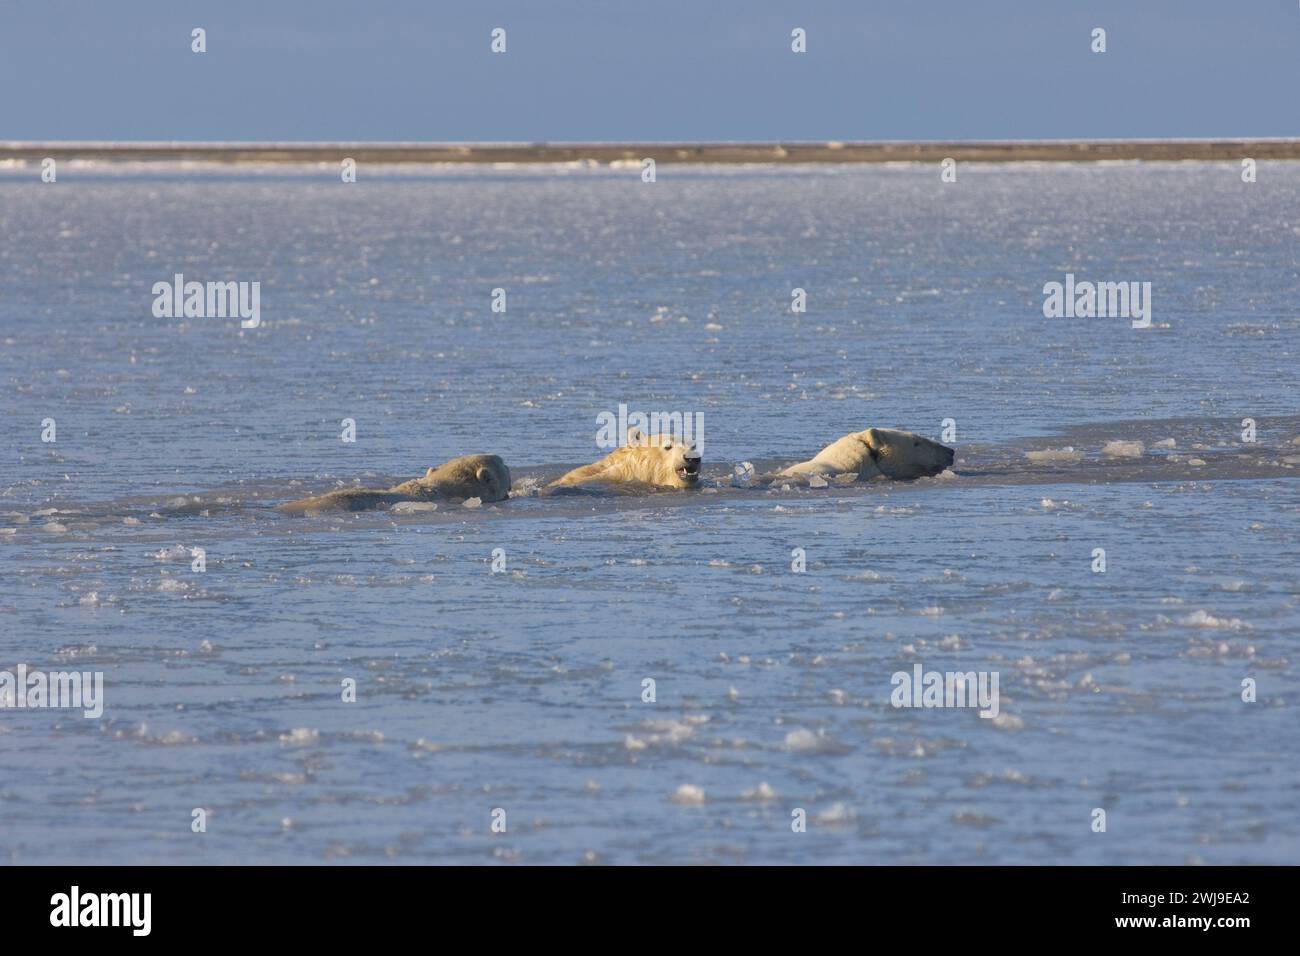 Polar bears, Ursus maritimus, sow cubs swimming in water in newly forming pack ice Beaufort Sea Arctic Ocean 1002 area of the anwr, Alaska Stock Photo